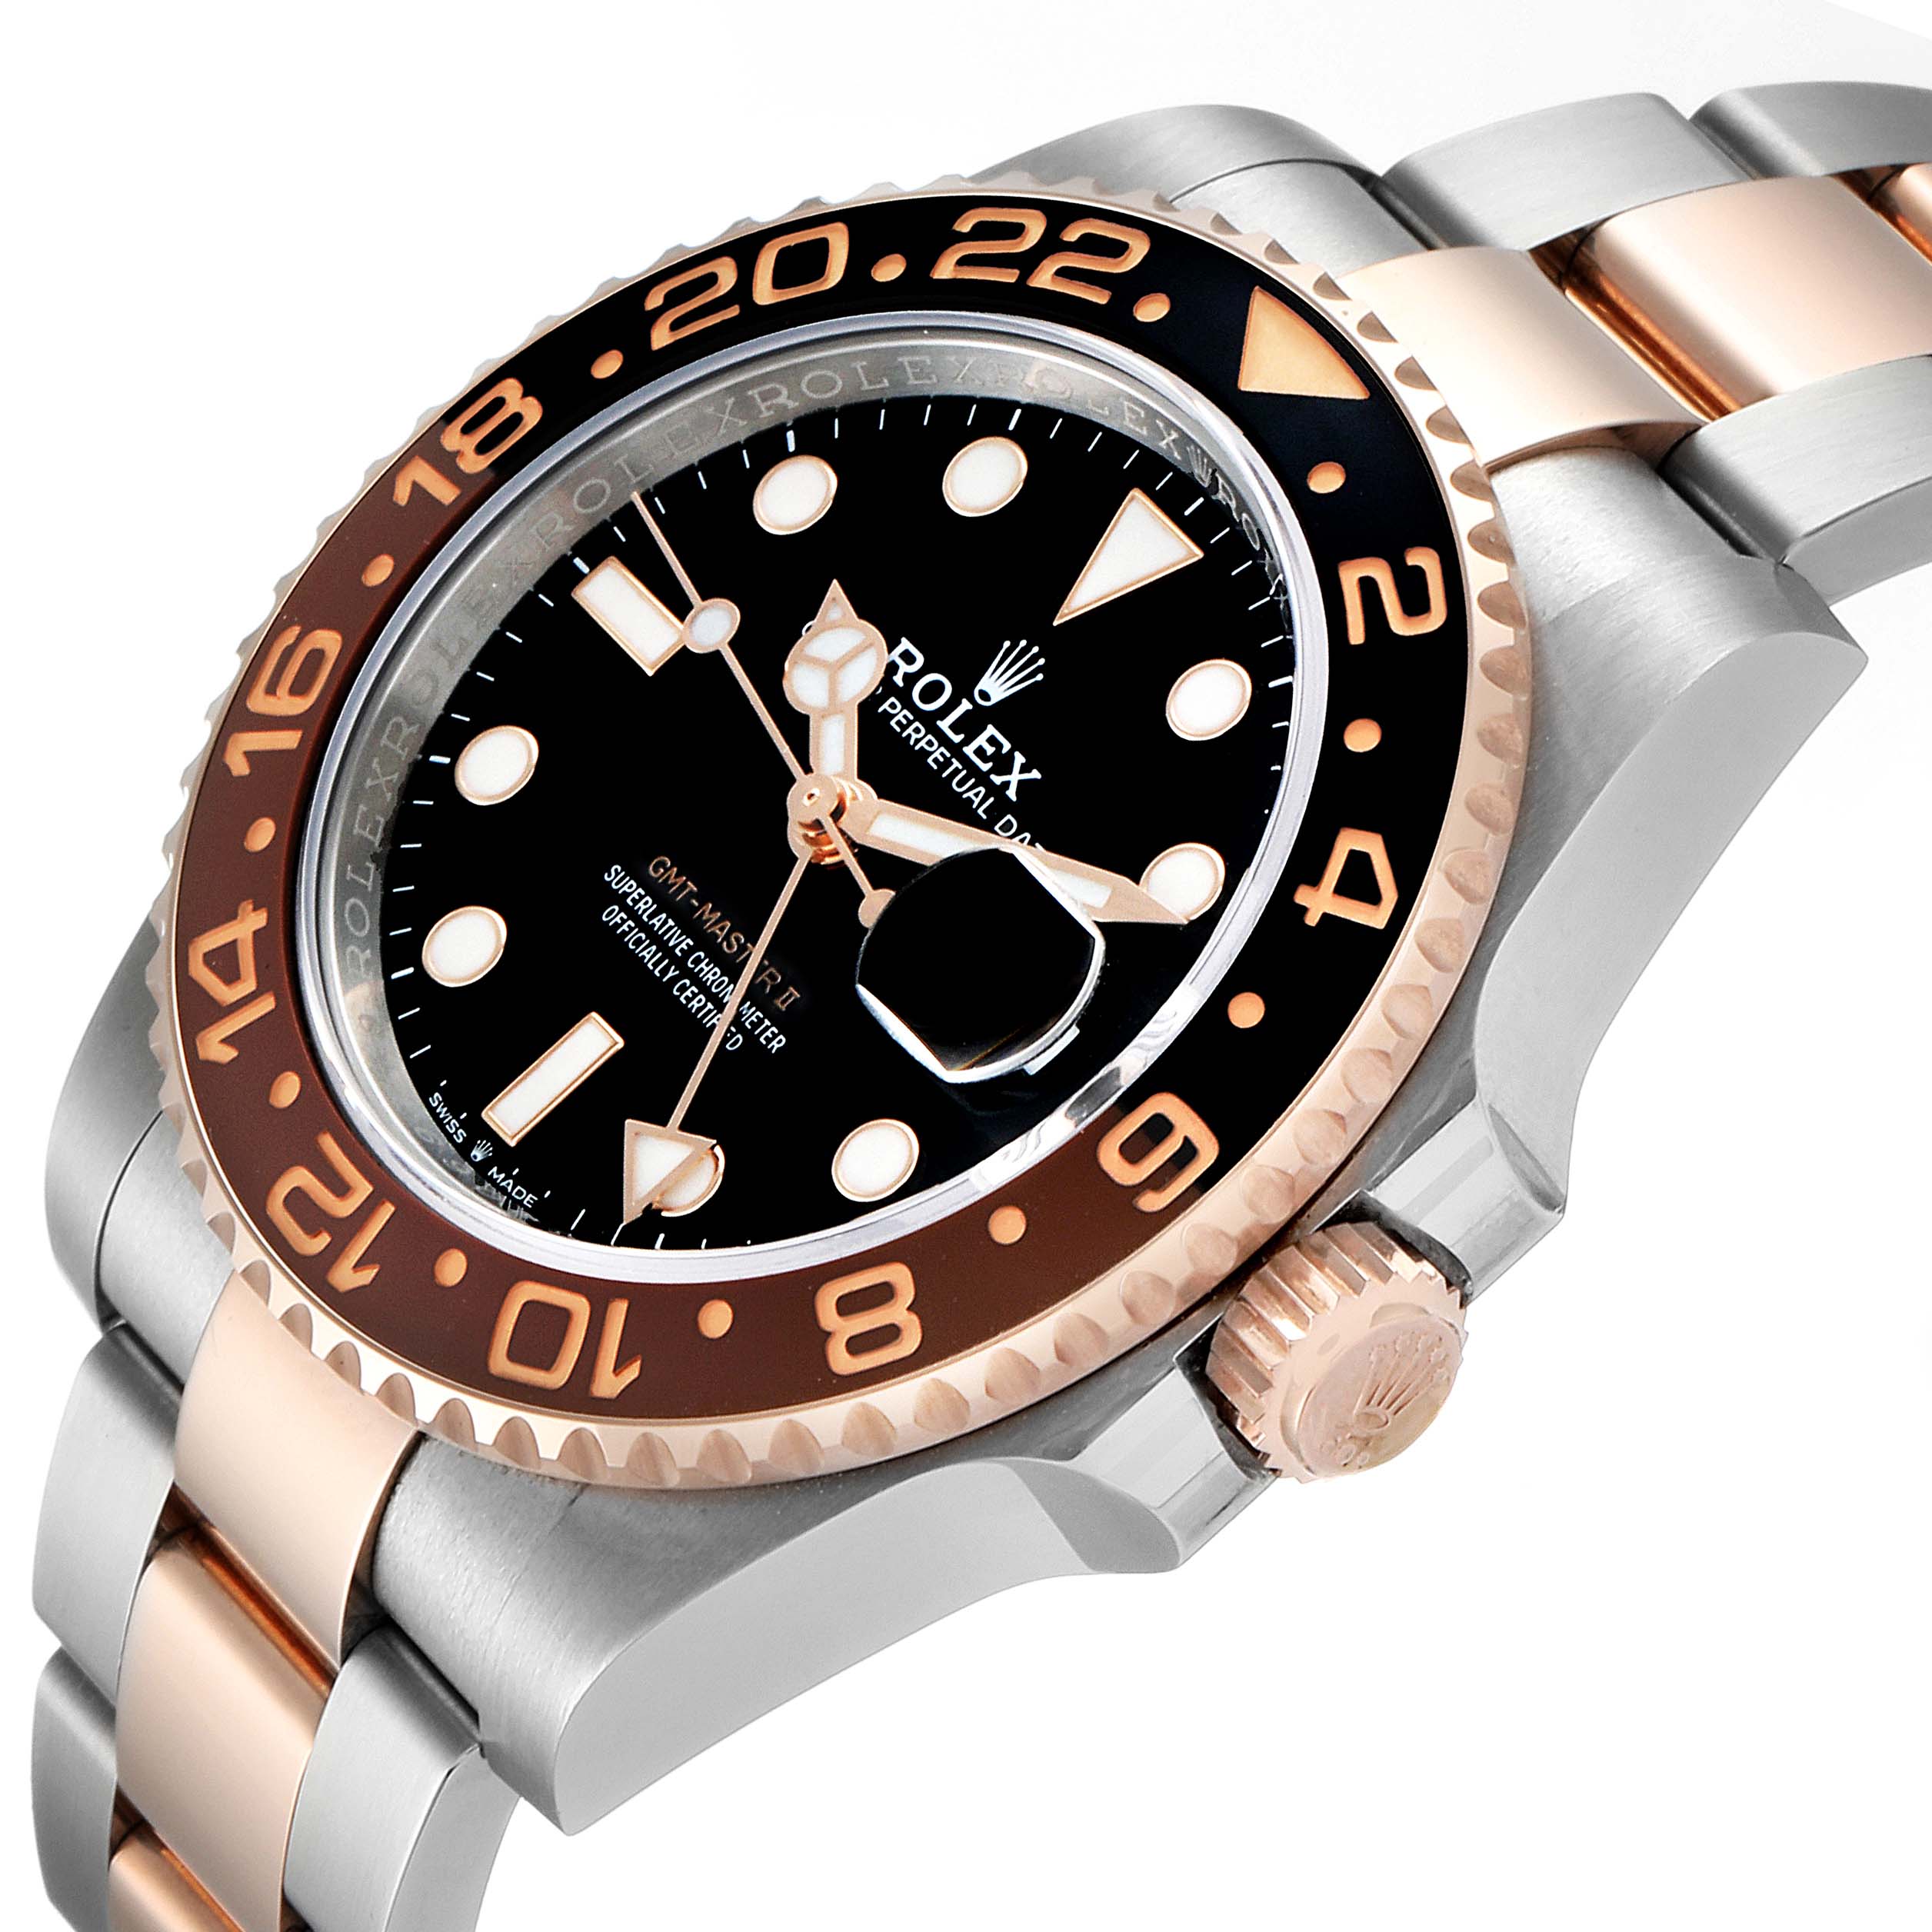 Rolex GMT Master II Steel Everose Gold Mens Watch 126711 Box Papers ...